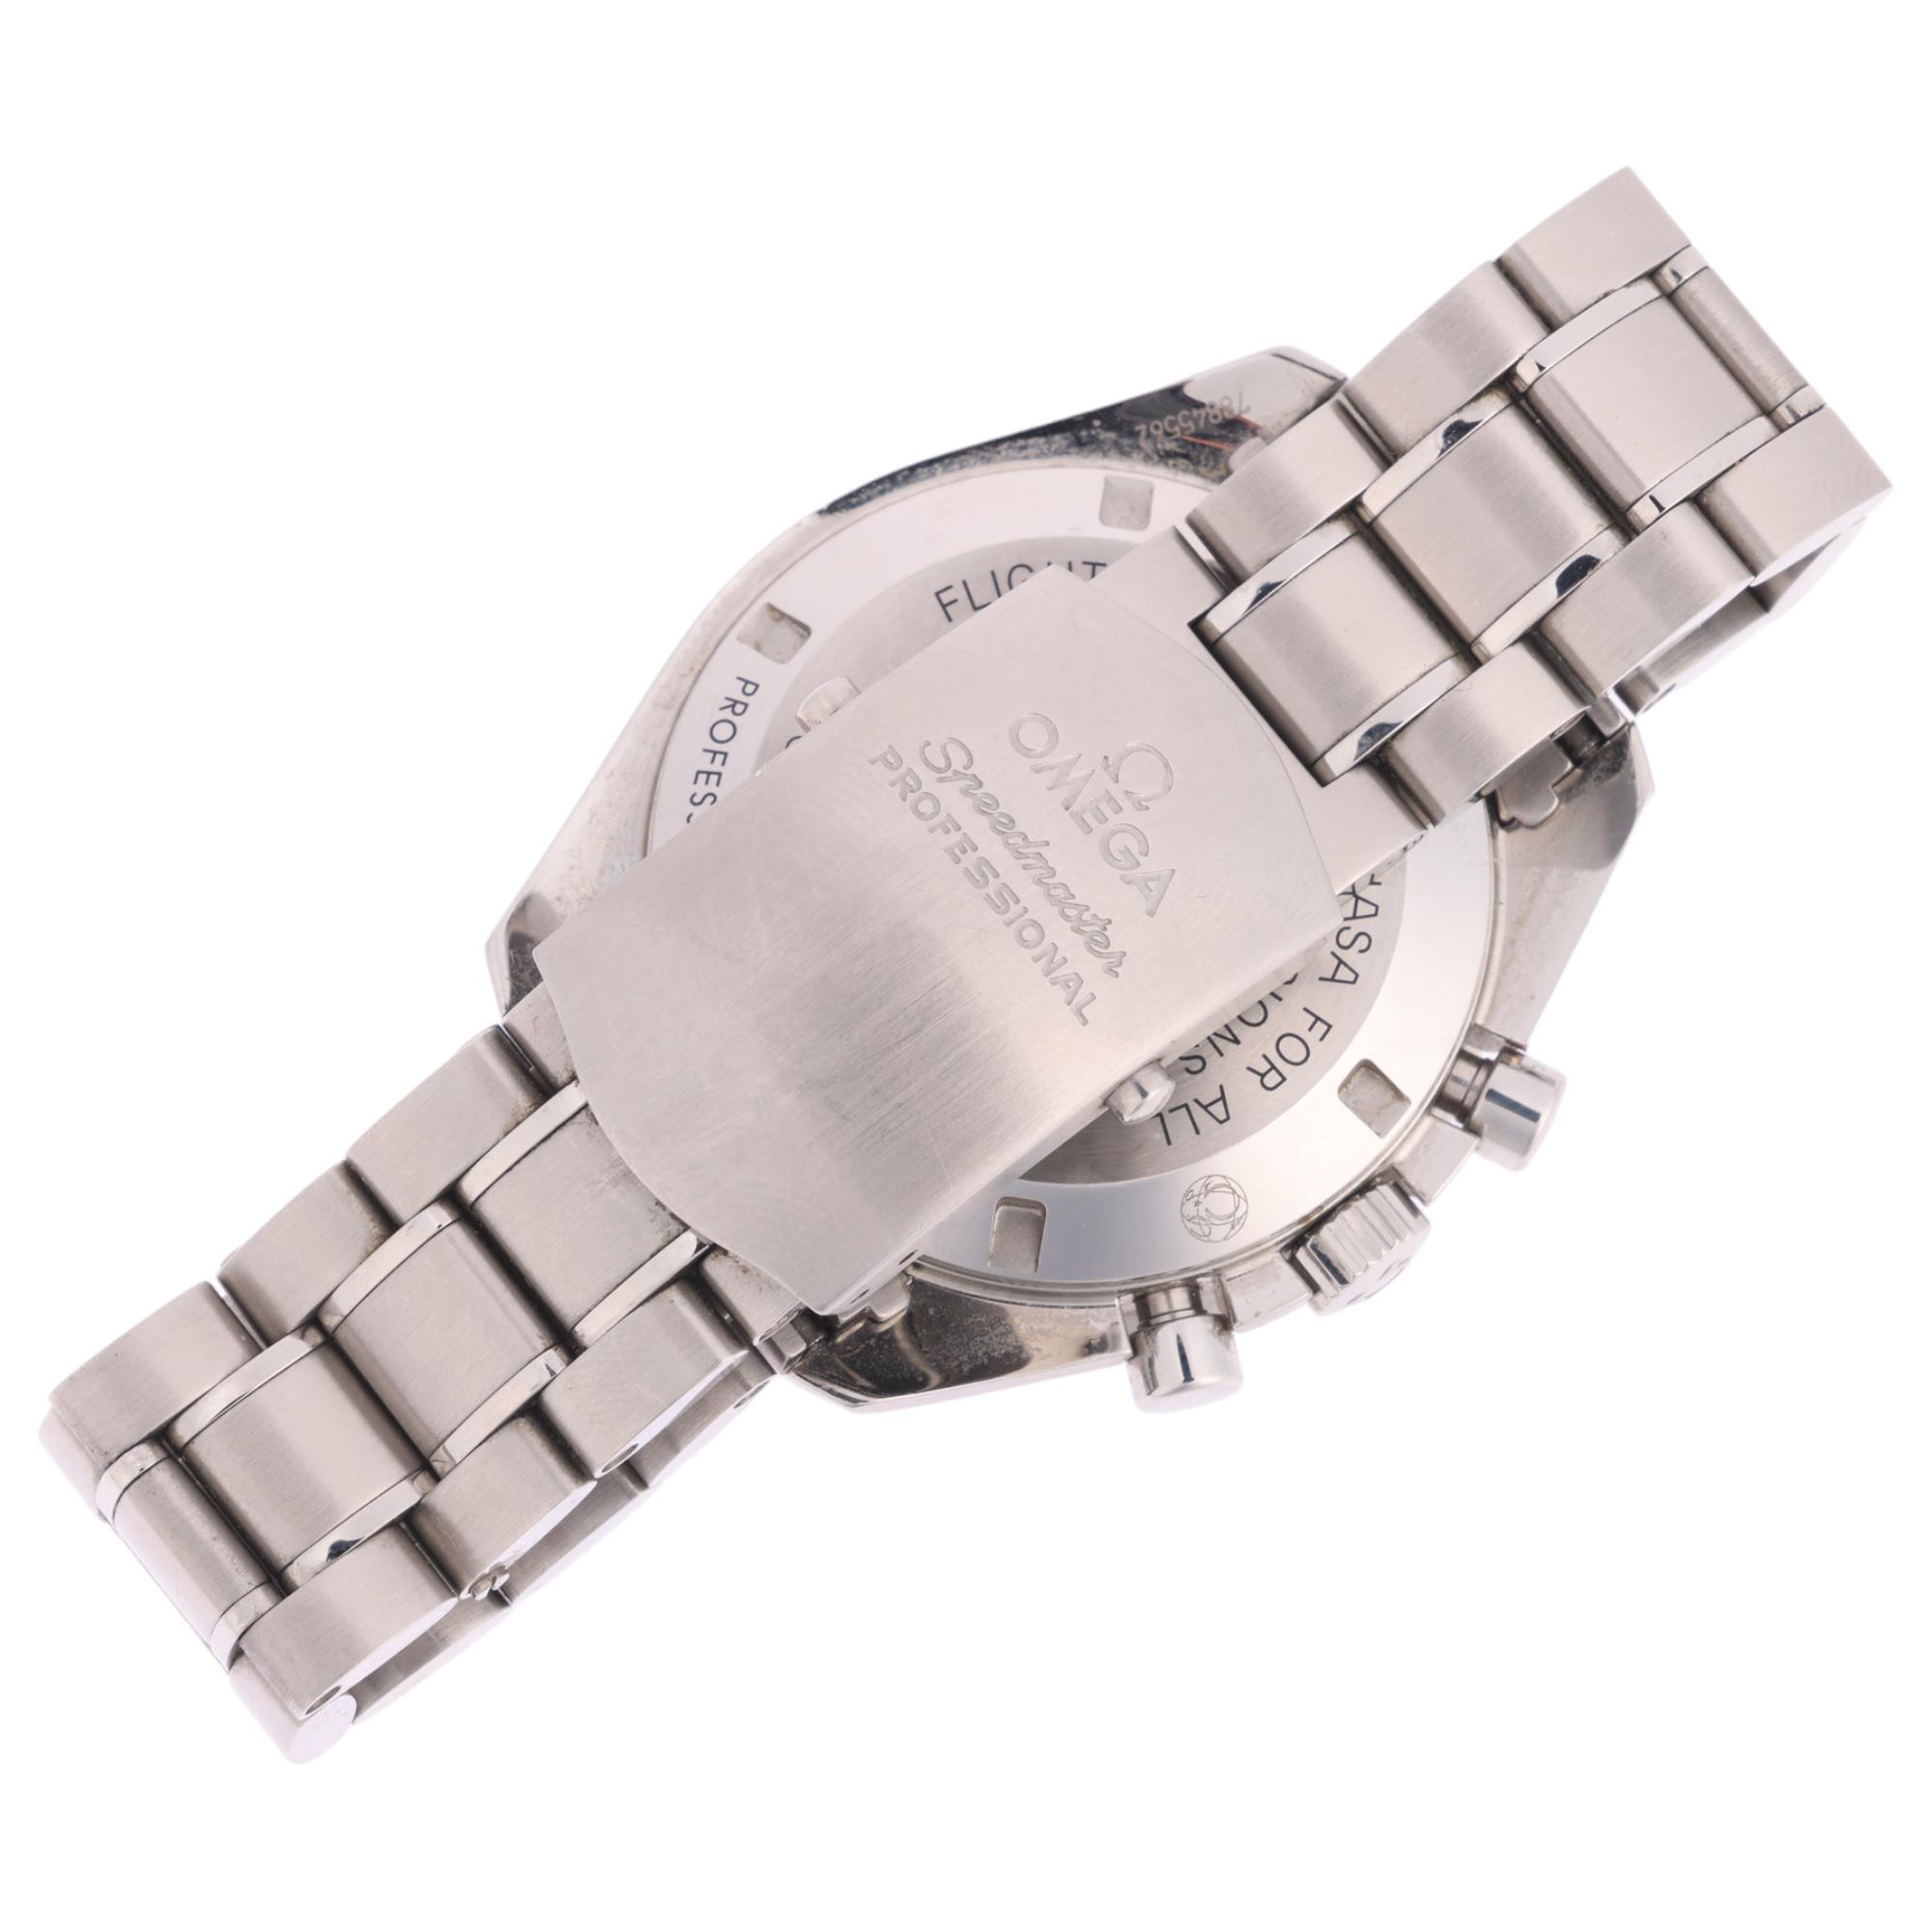 OMEGA - a stainless steel Speedmaster Professional 'Moonwatch' mechanical chronograph bracelet - Image 3 of 5